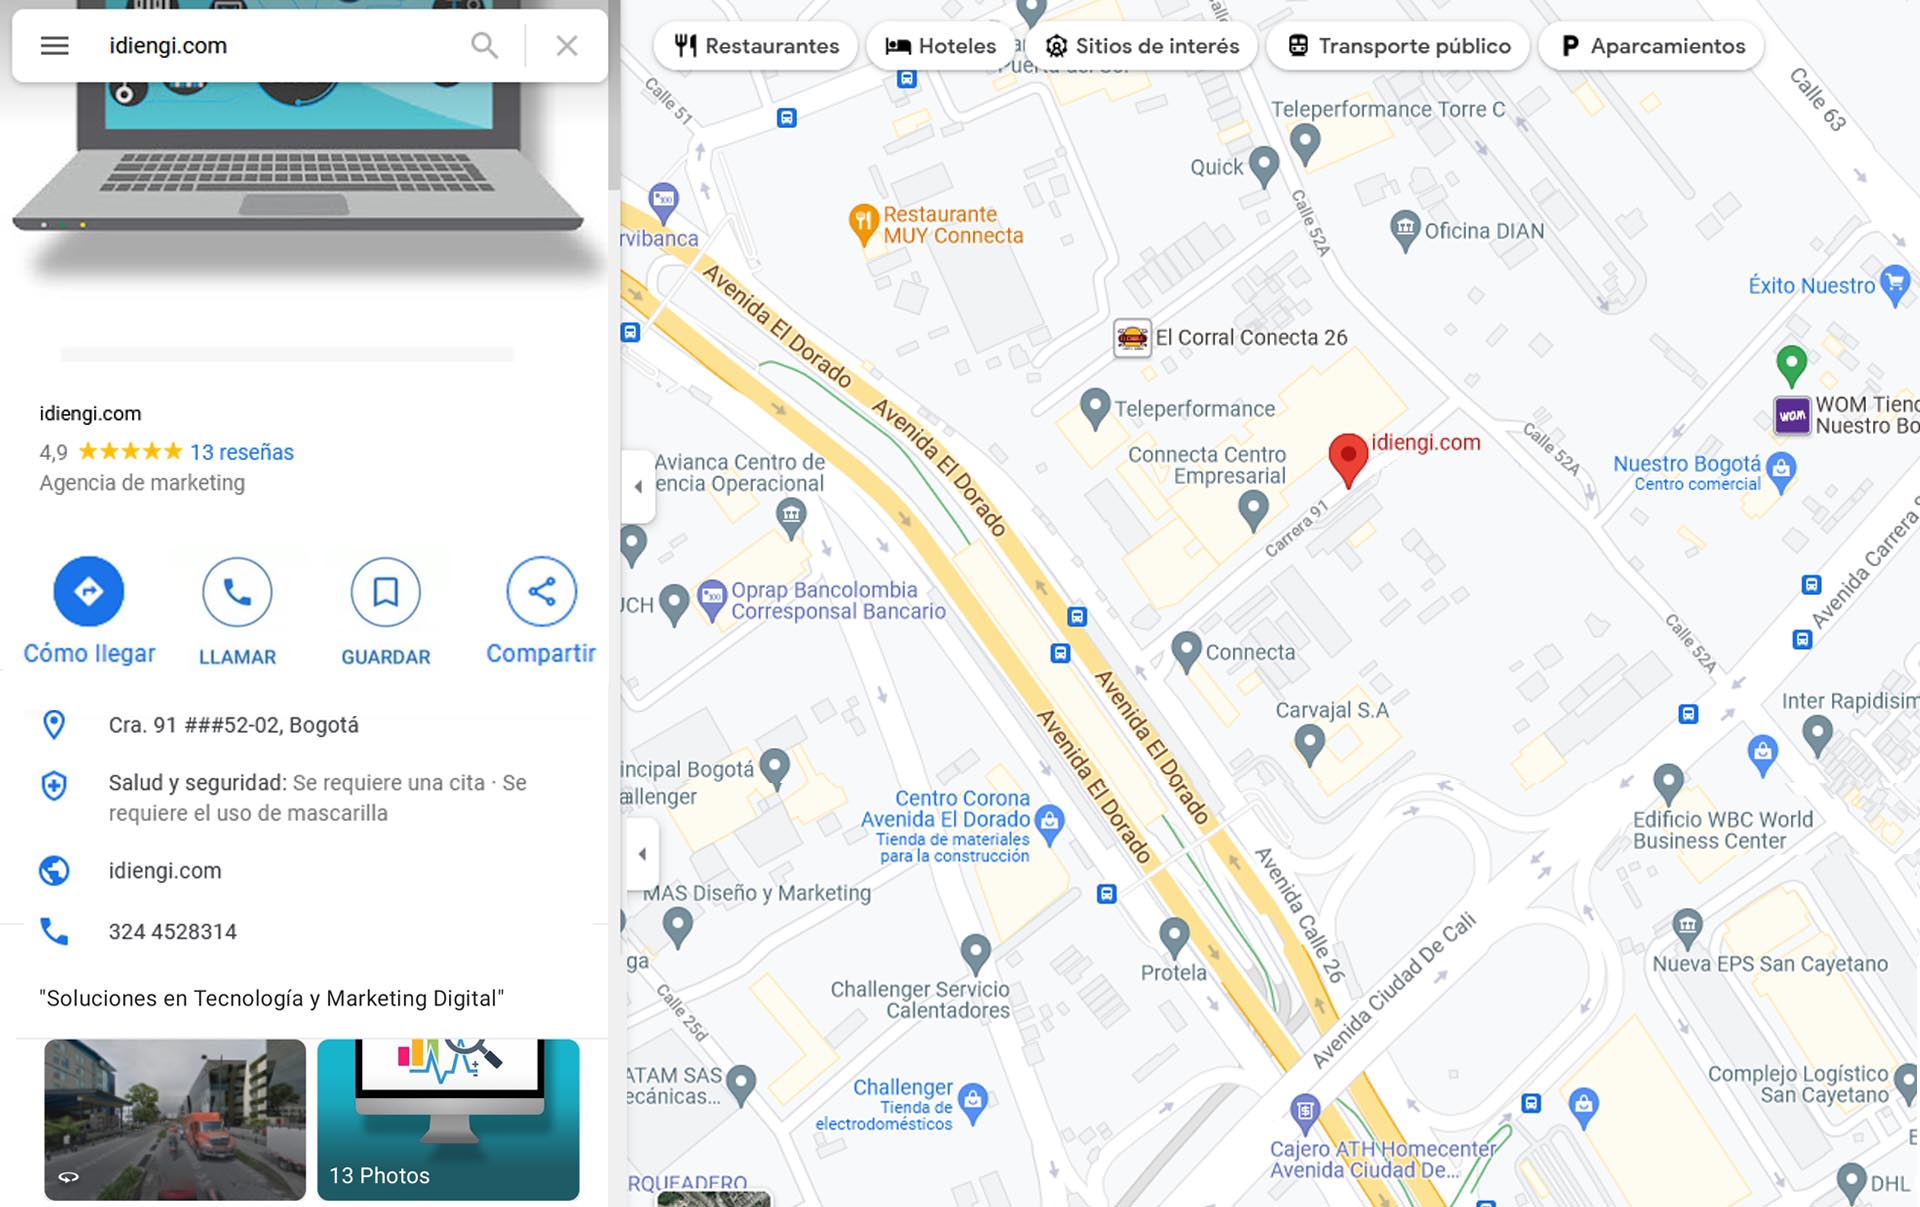 Your Company on Google Maps